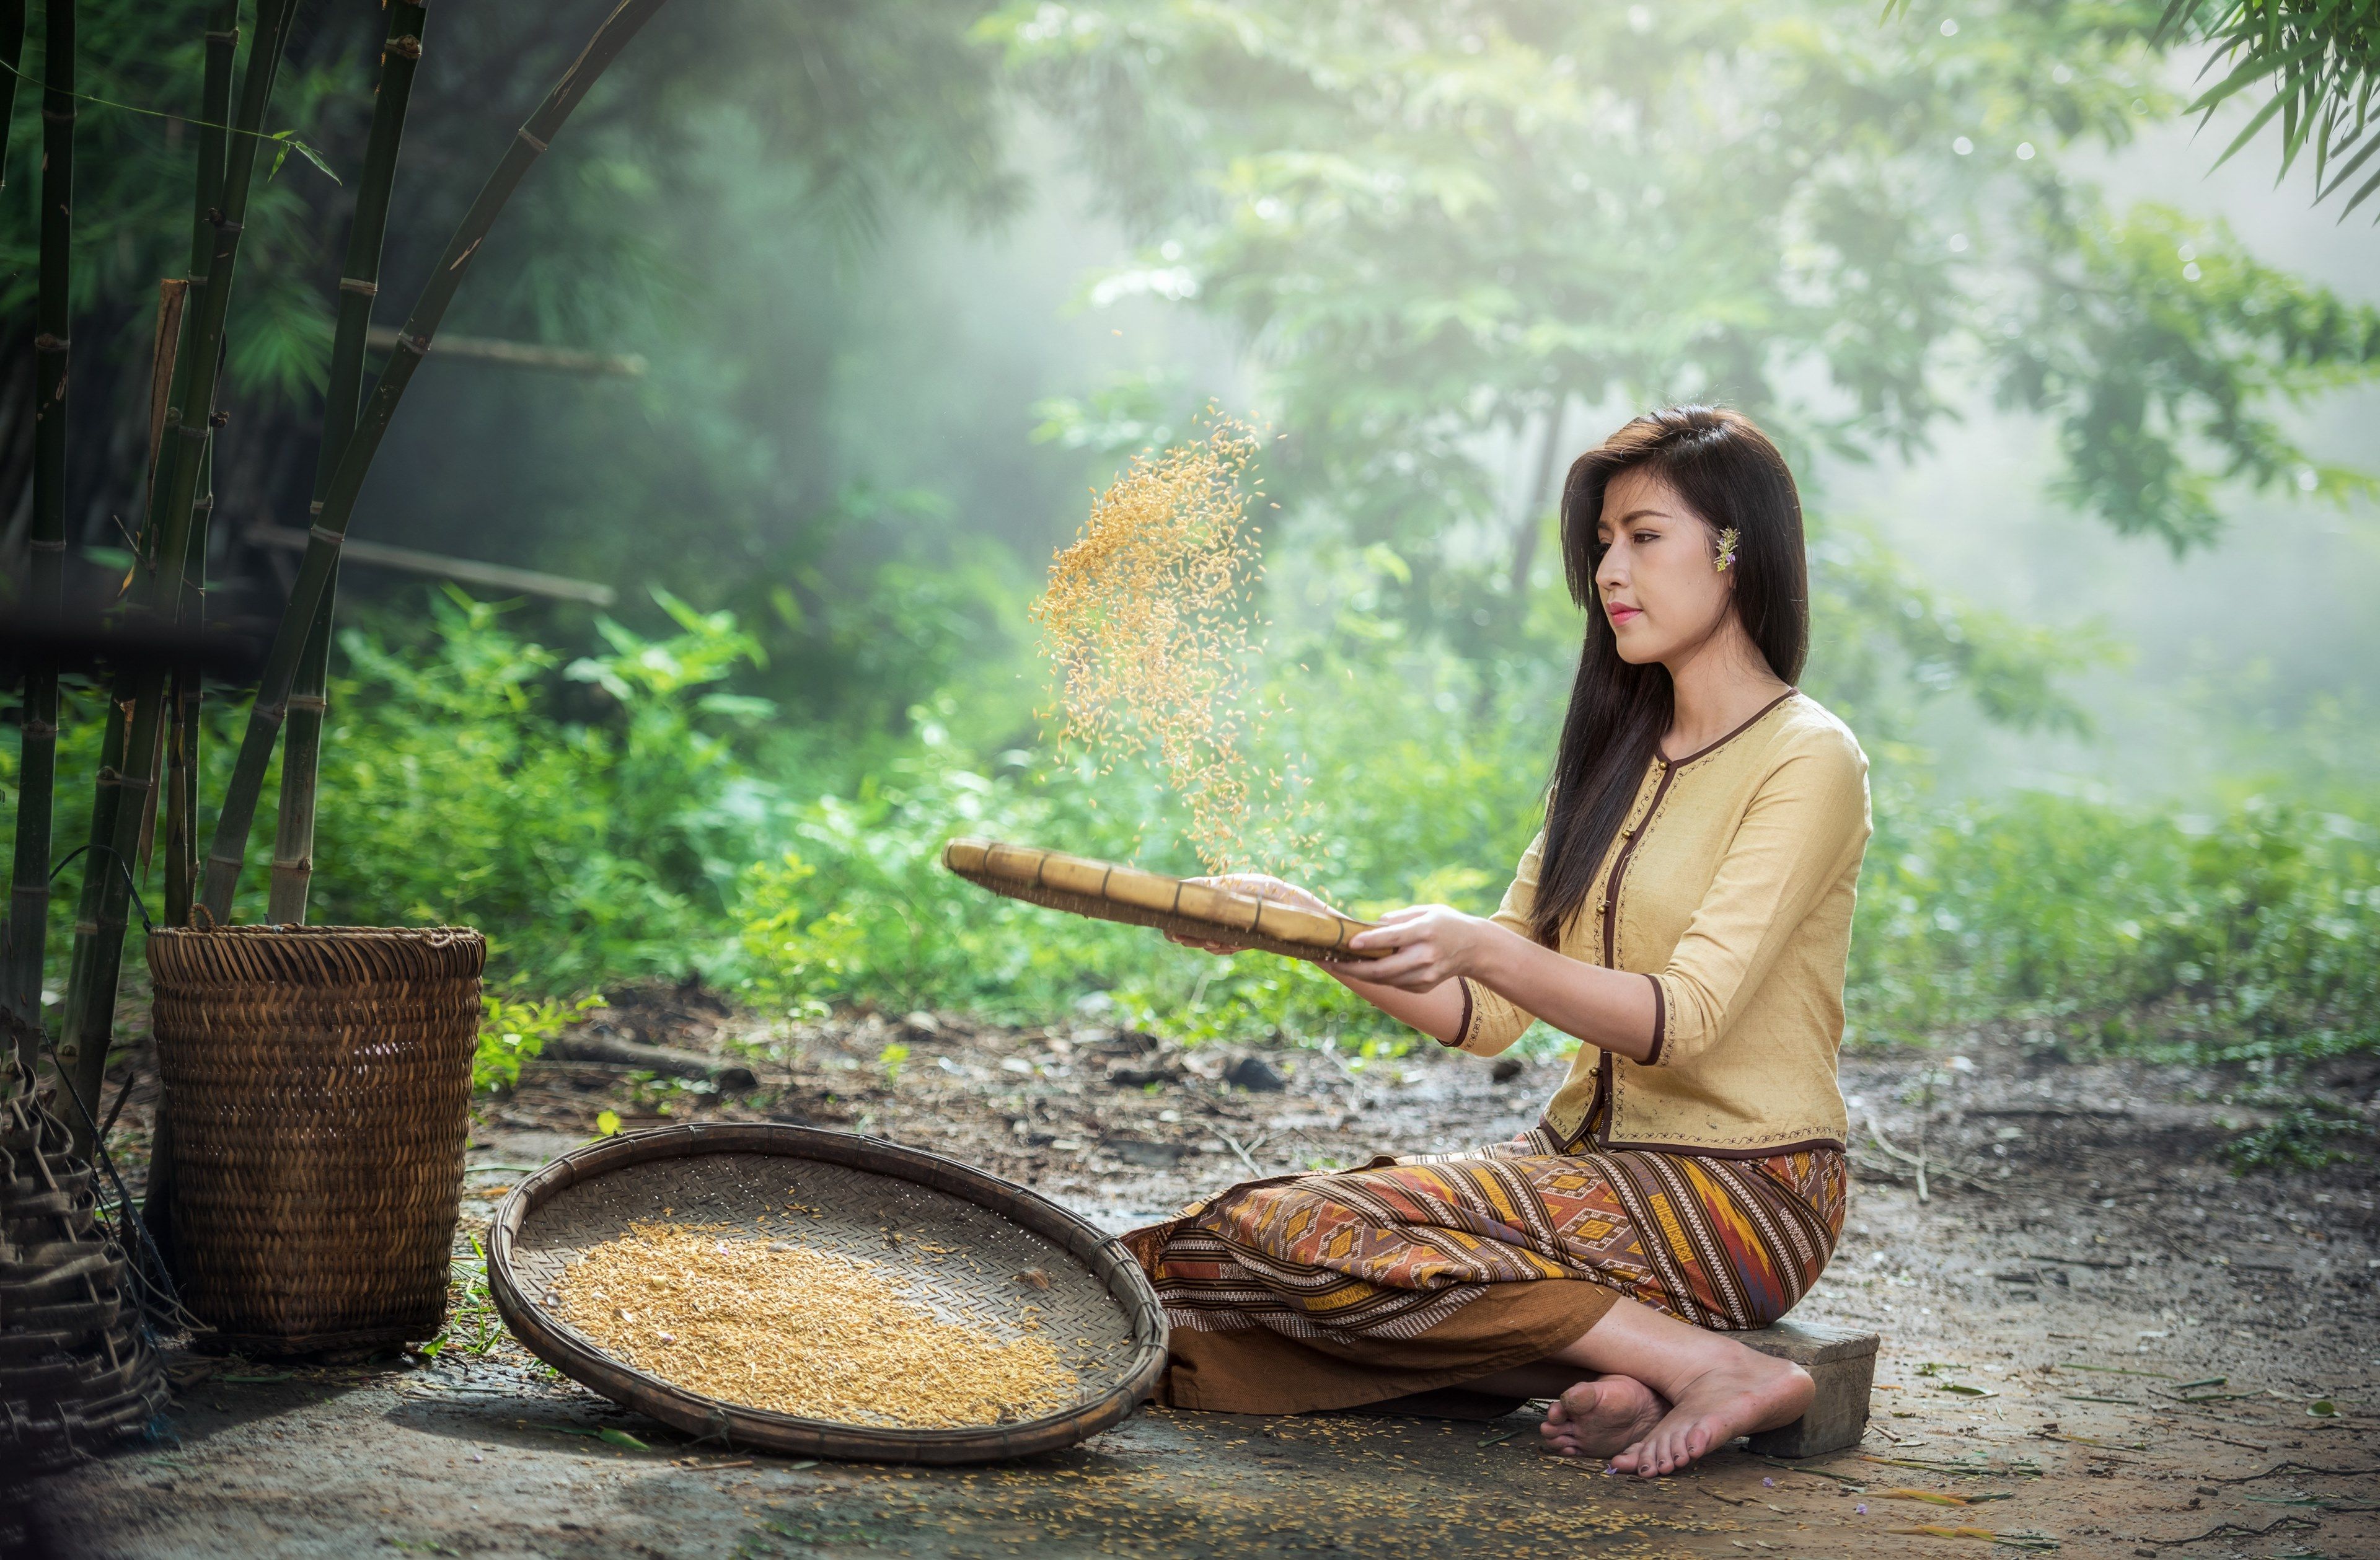 Wallpaper / rice sow adult ancient asia the job pretty 4k wallpaper